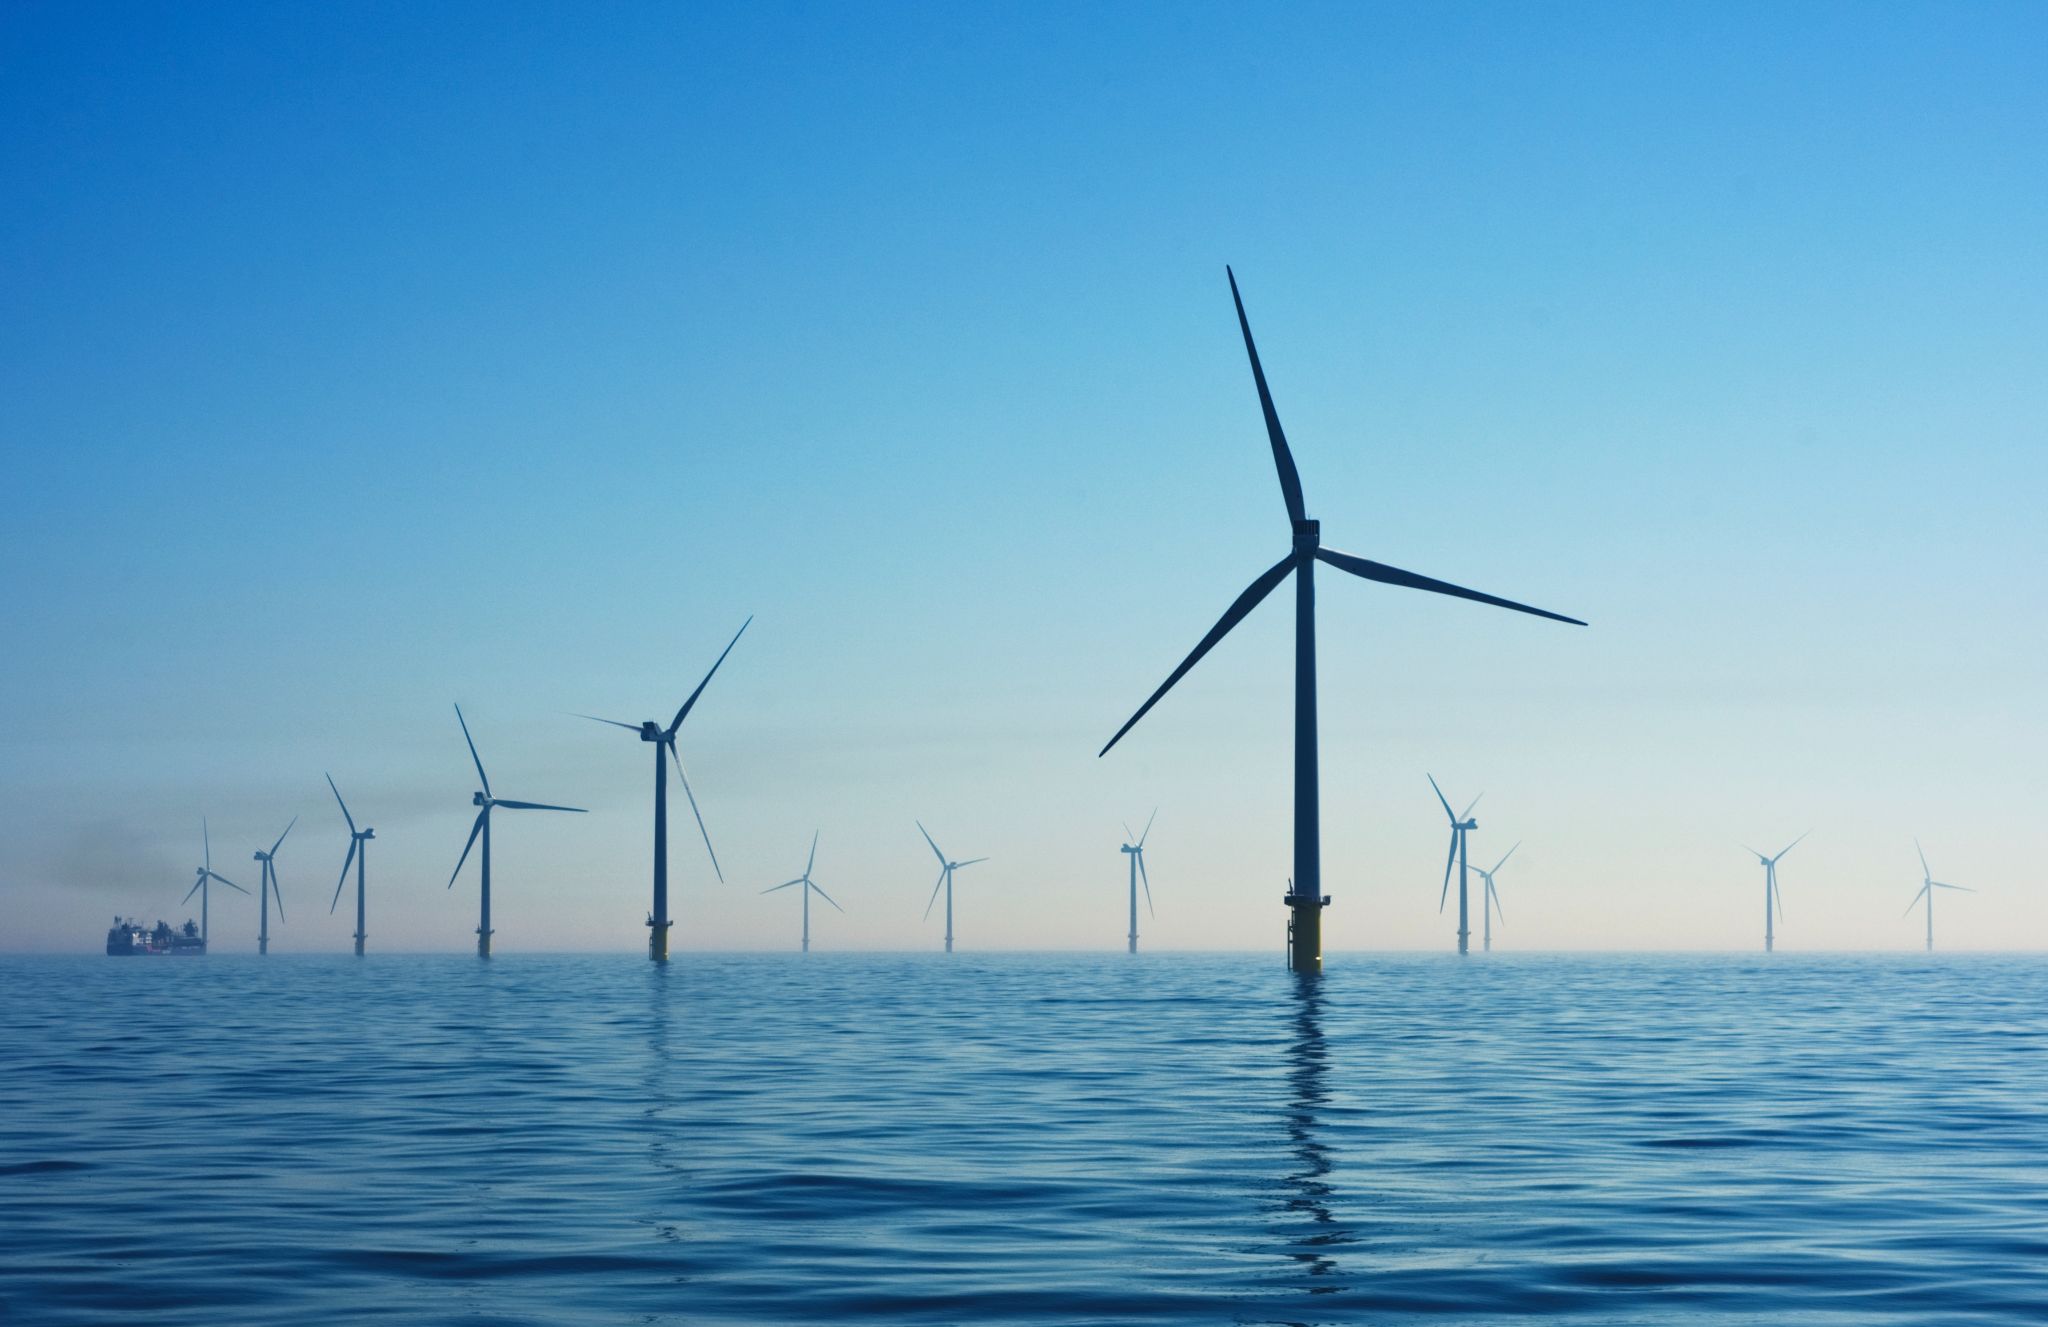 Baltic Sea Countries Agree to Increase Offshore Wind Capacity Sevenfold by 2030